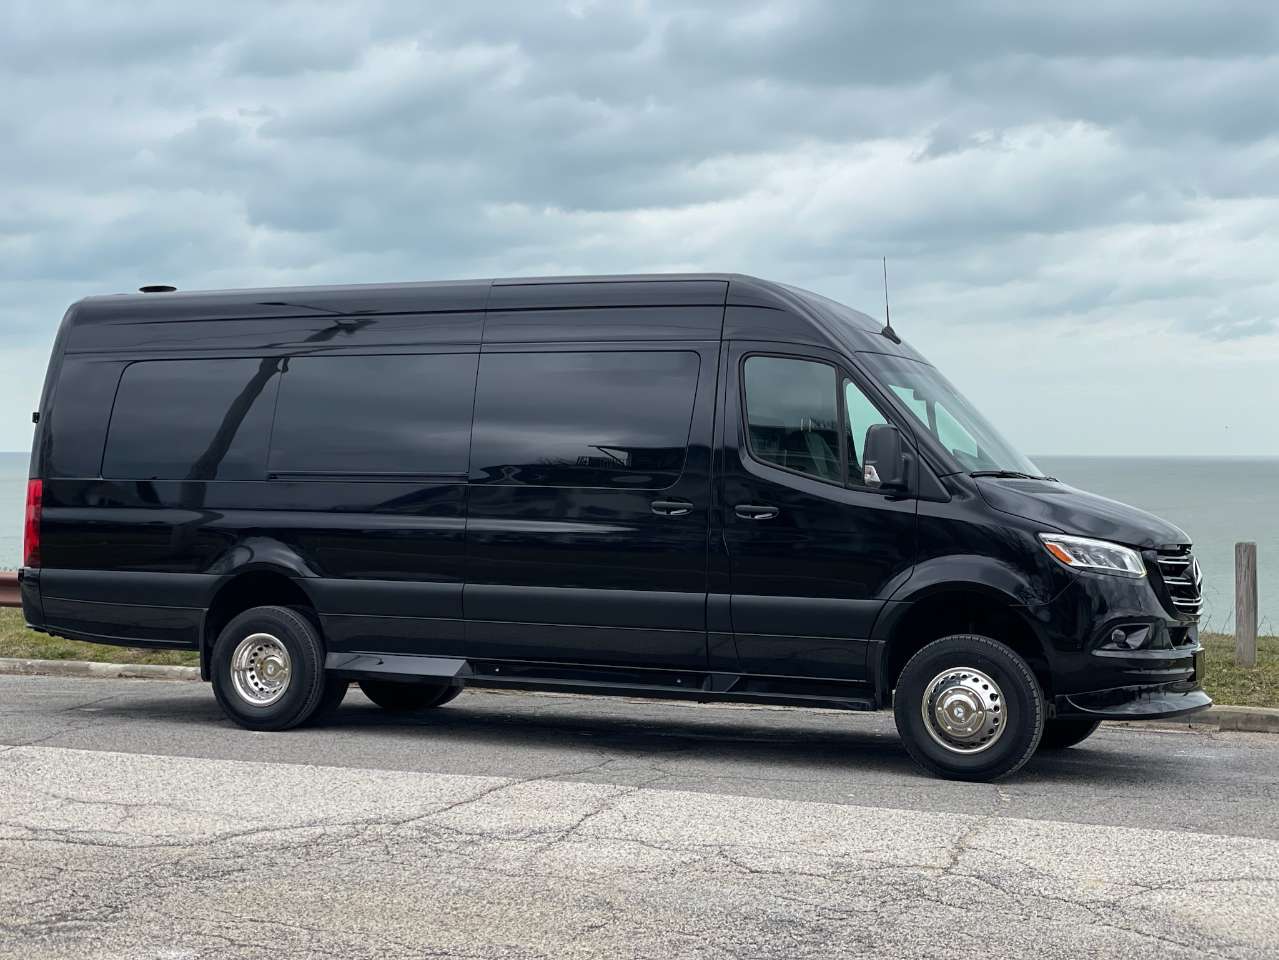 Luxury Sprinter Sales by American Coach Sales - Luxury Mobile Office